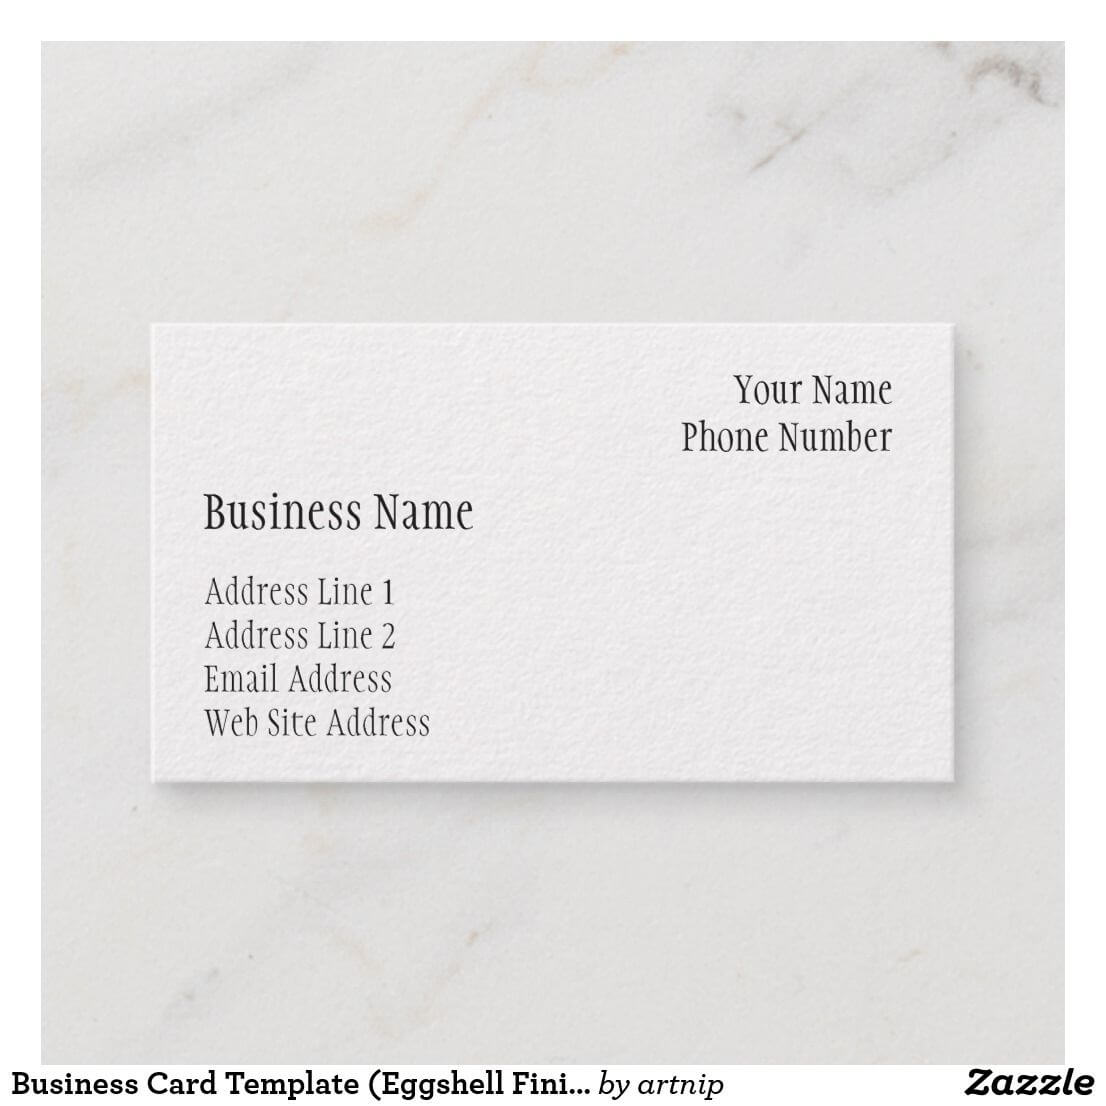 Business Card Template (Eggshell Finish) | Zazzle In With Regard To Amscan Imprintable Place Card Template